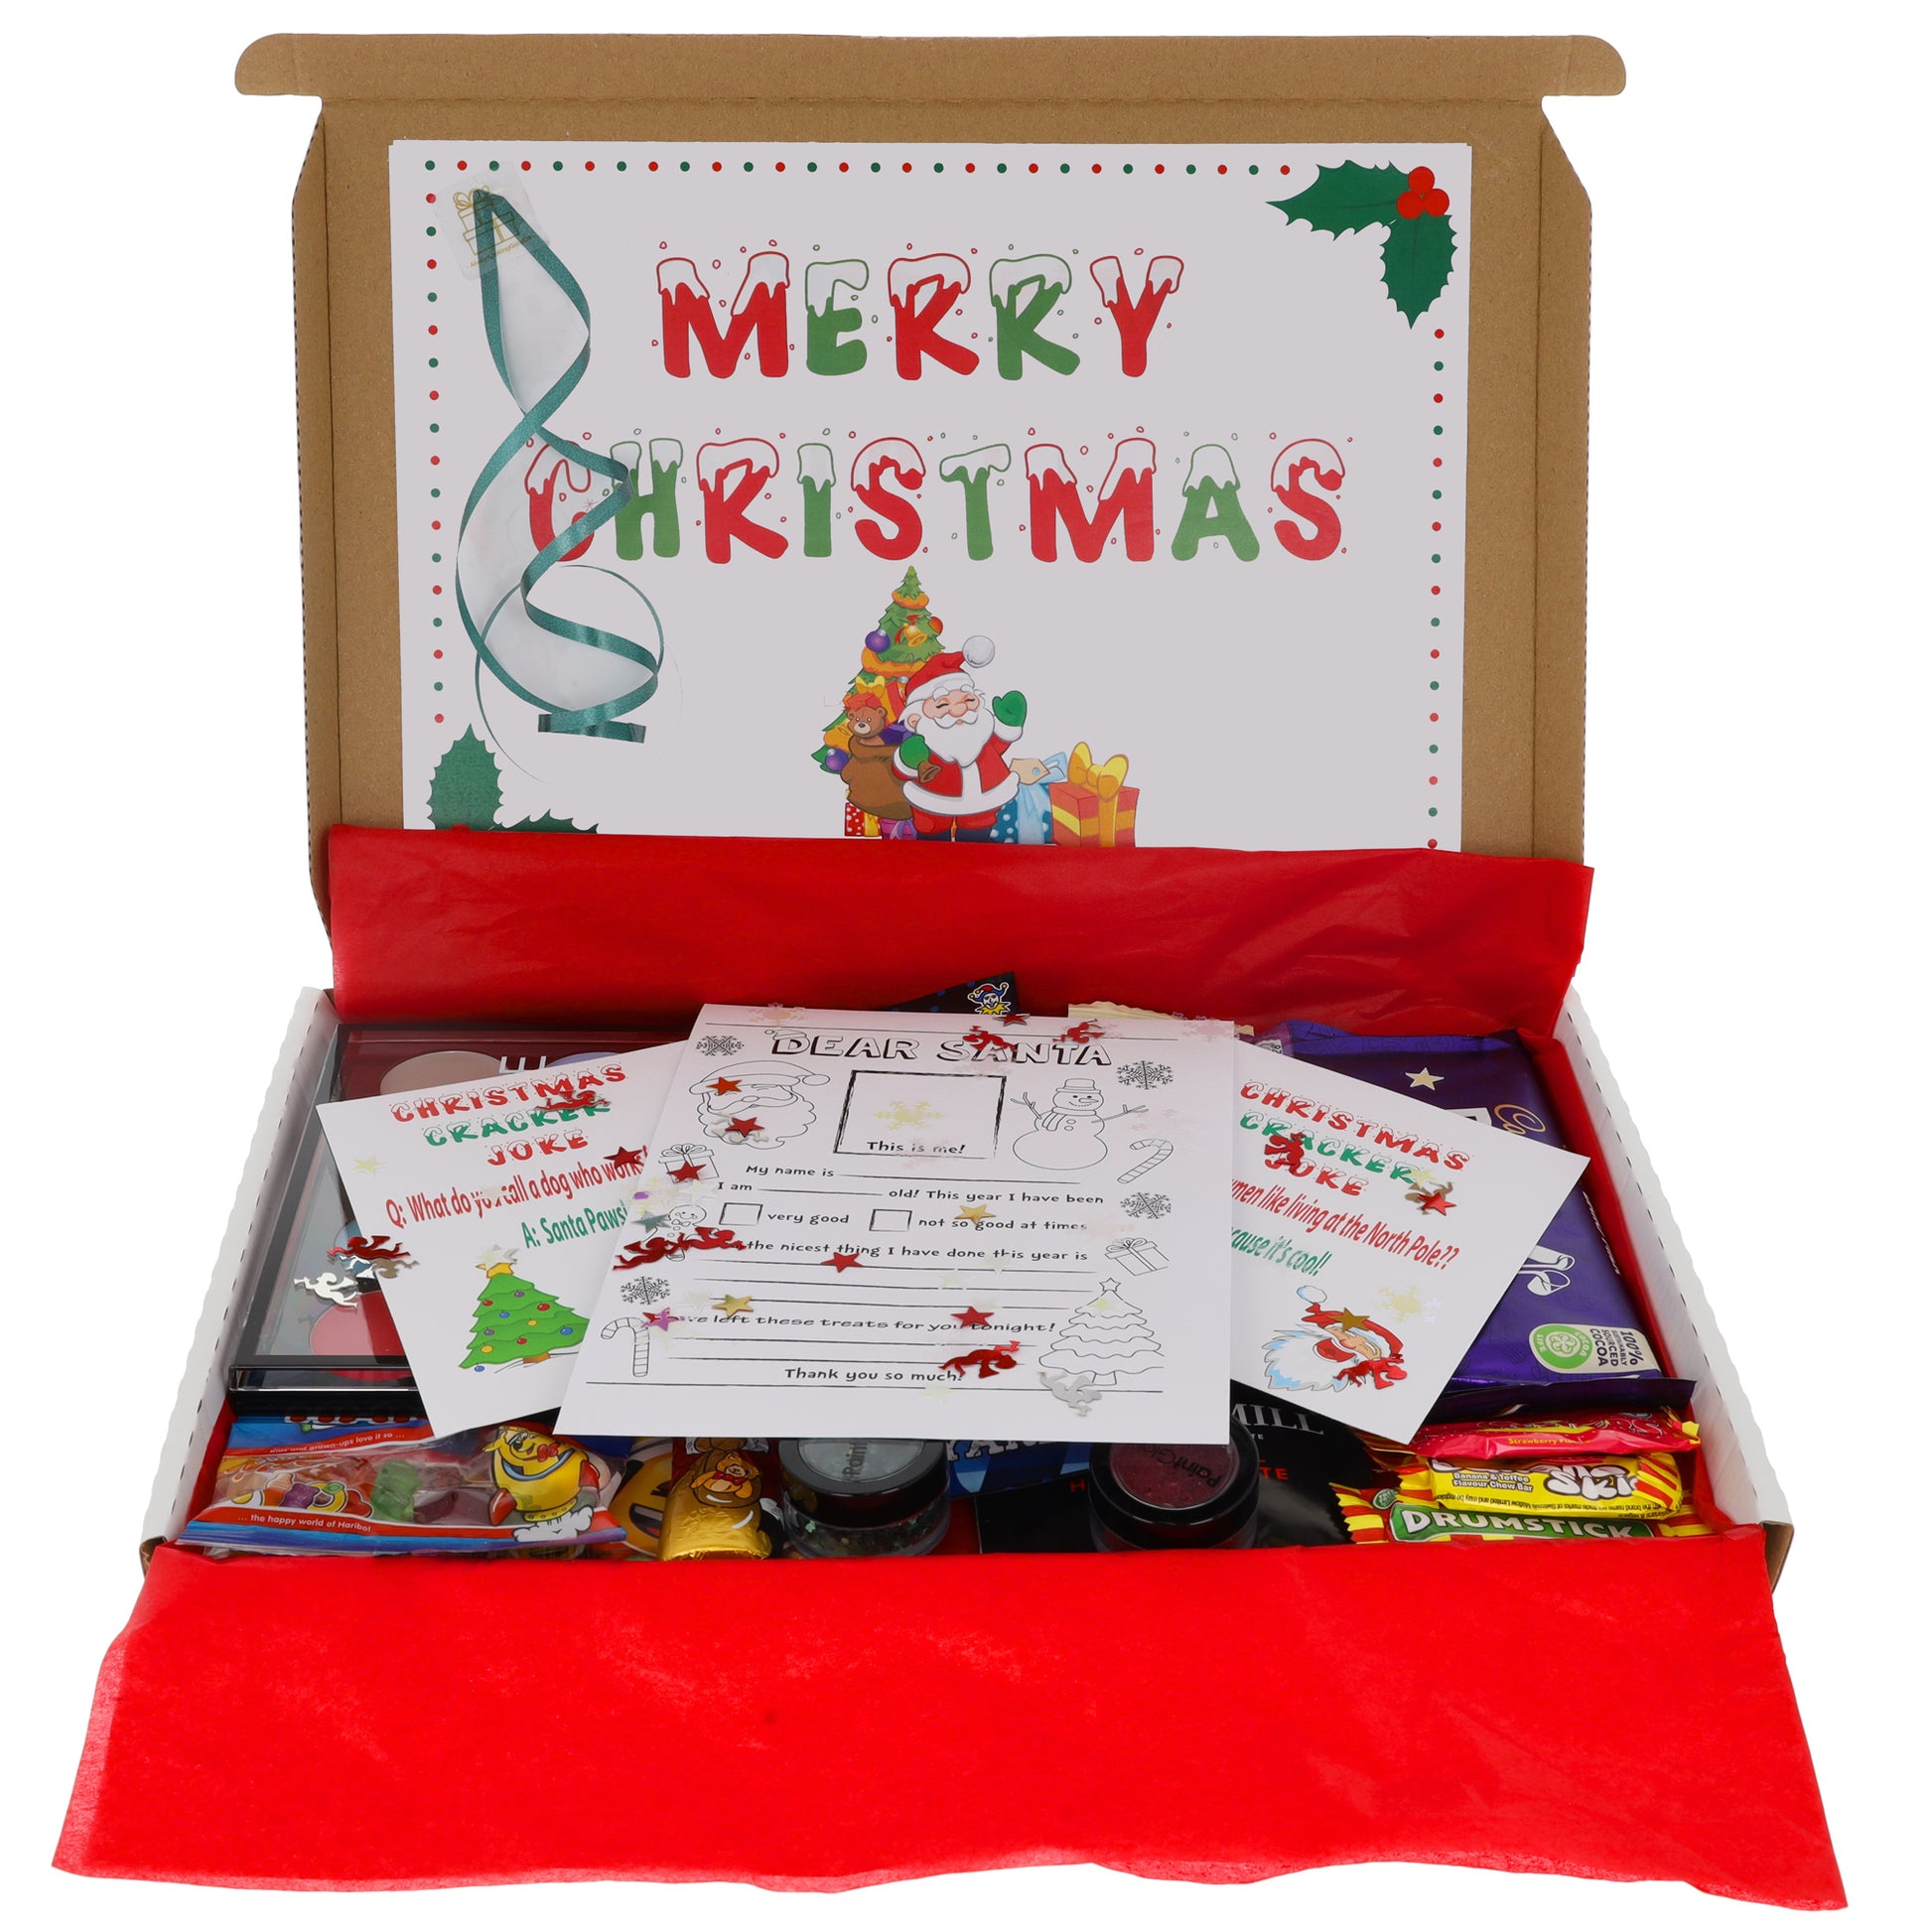 Christmas Activity and Treats Letterbox Gift for Kids of all ages!  - Always Looking Good -   